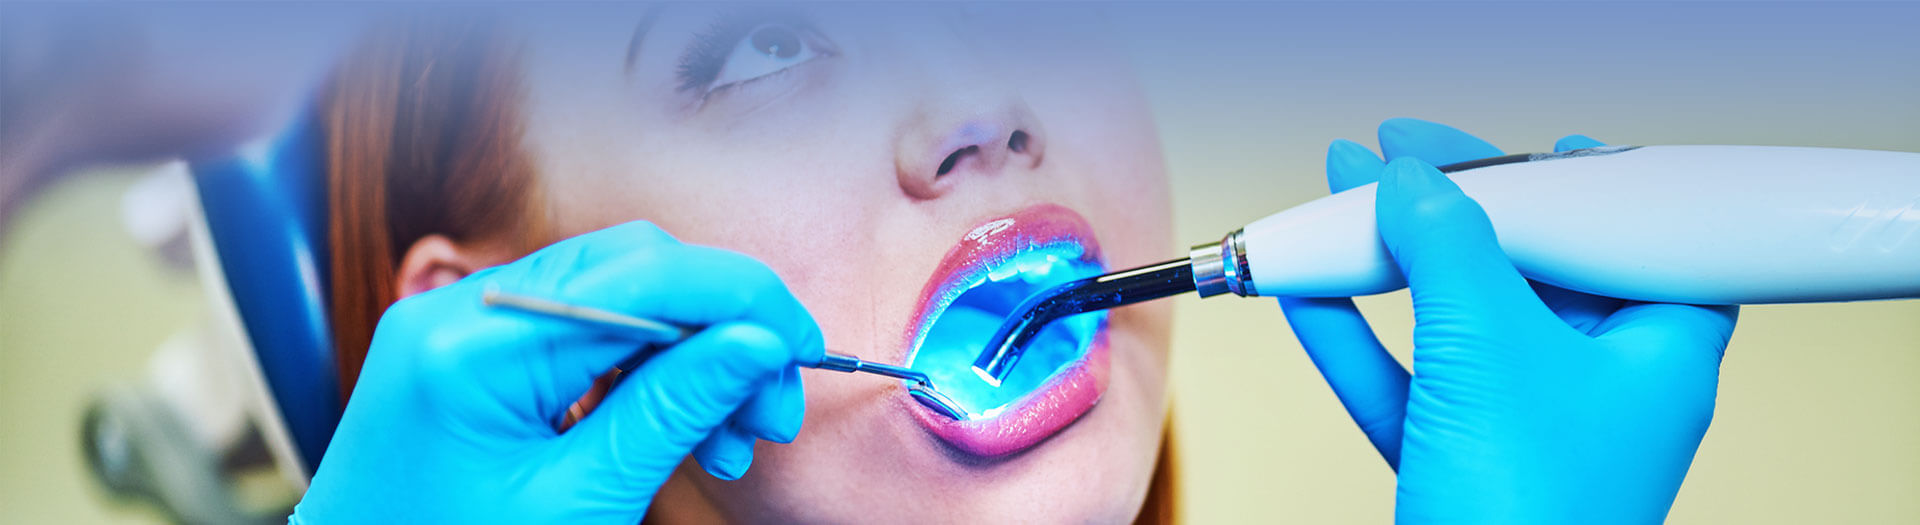 Dentist working with dental polymerization lamp in oral cavity